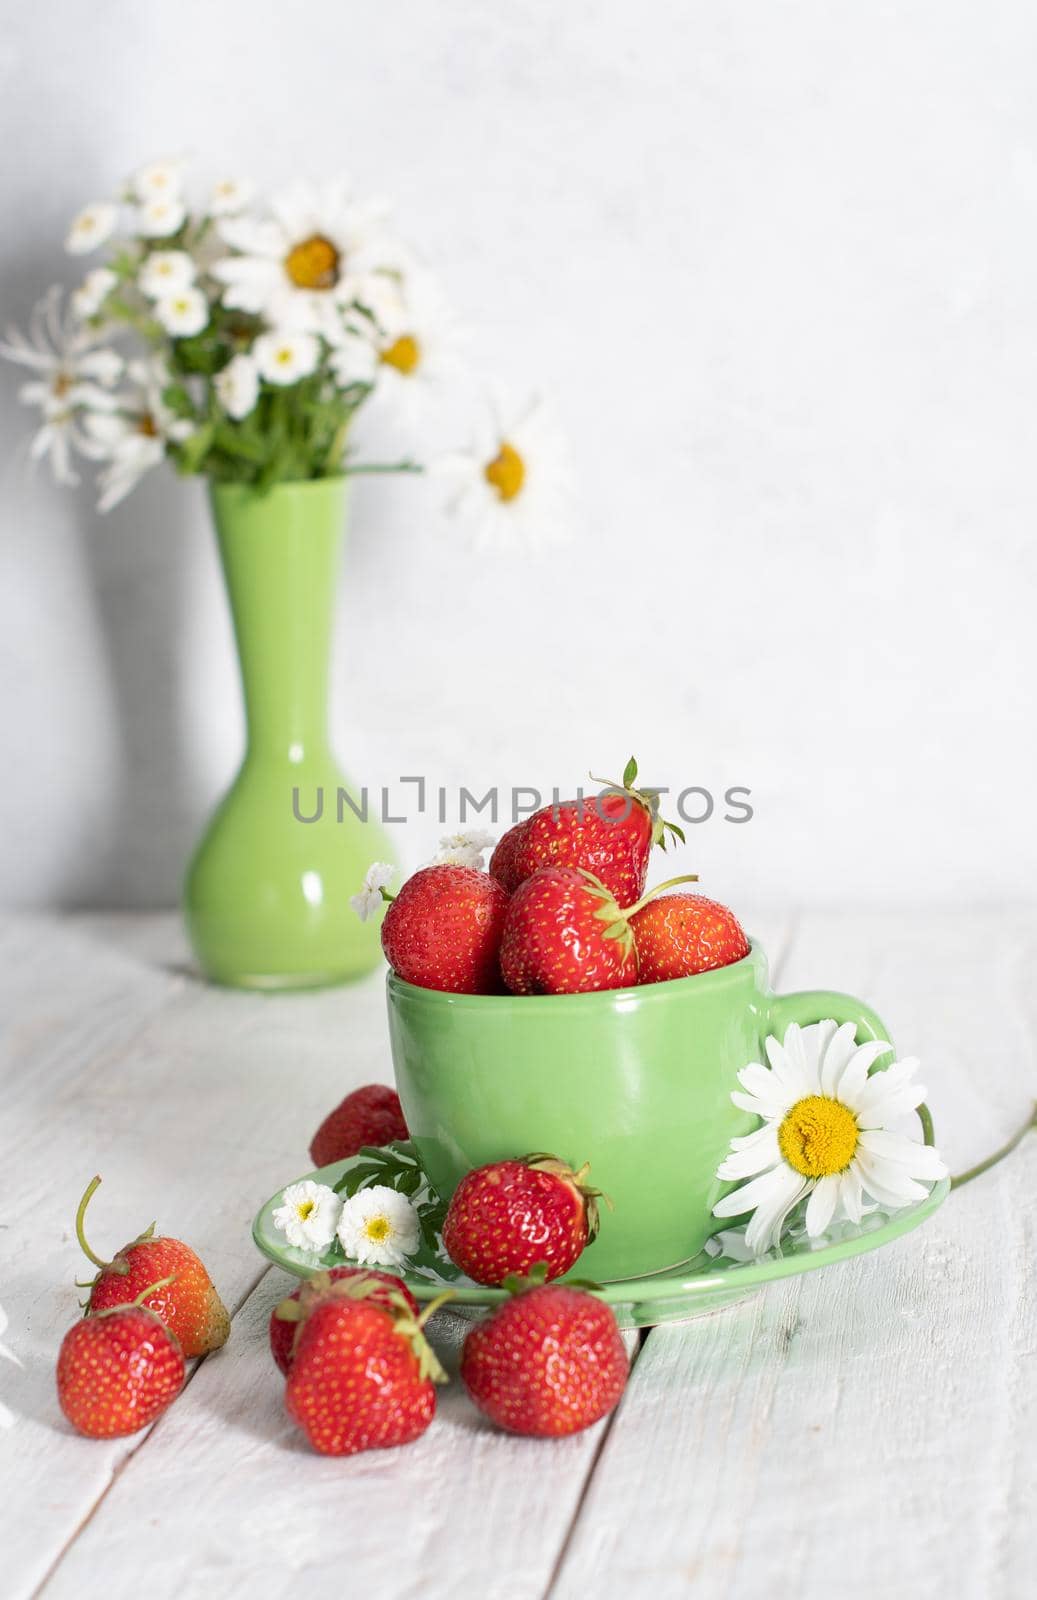 ripe strawberries from the garden in a green mug with white chamomile, summer by KaterinaDalemans